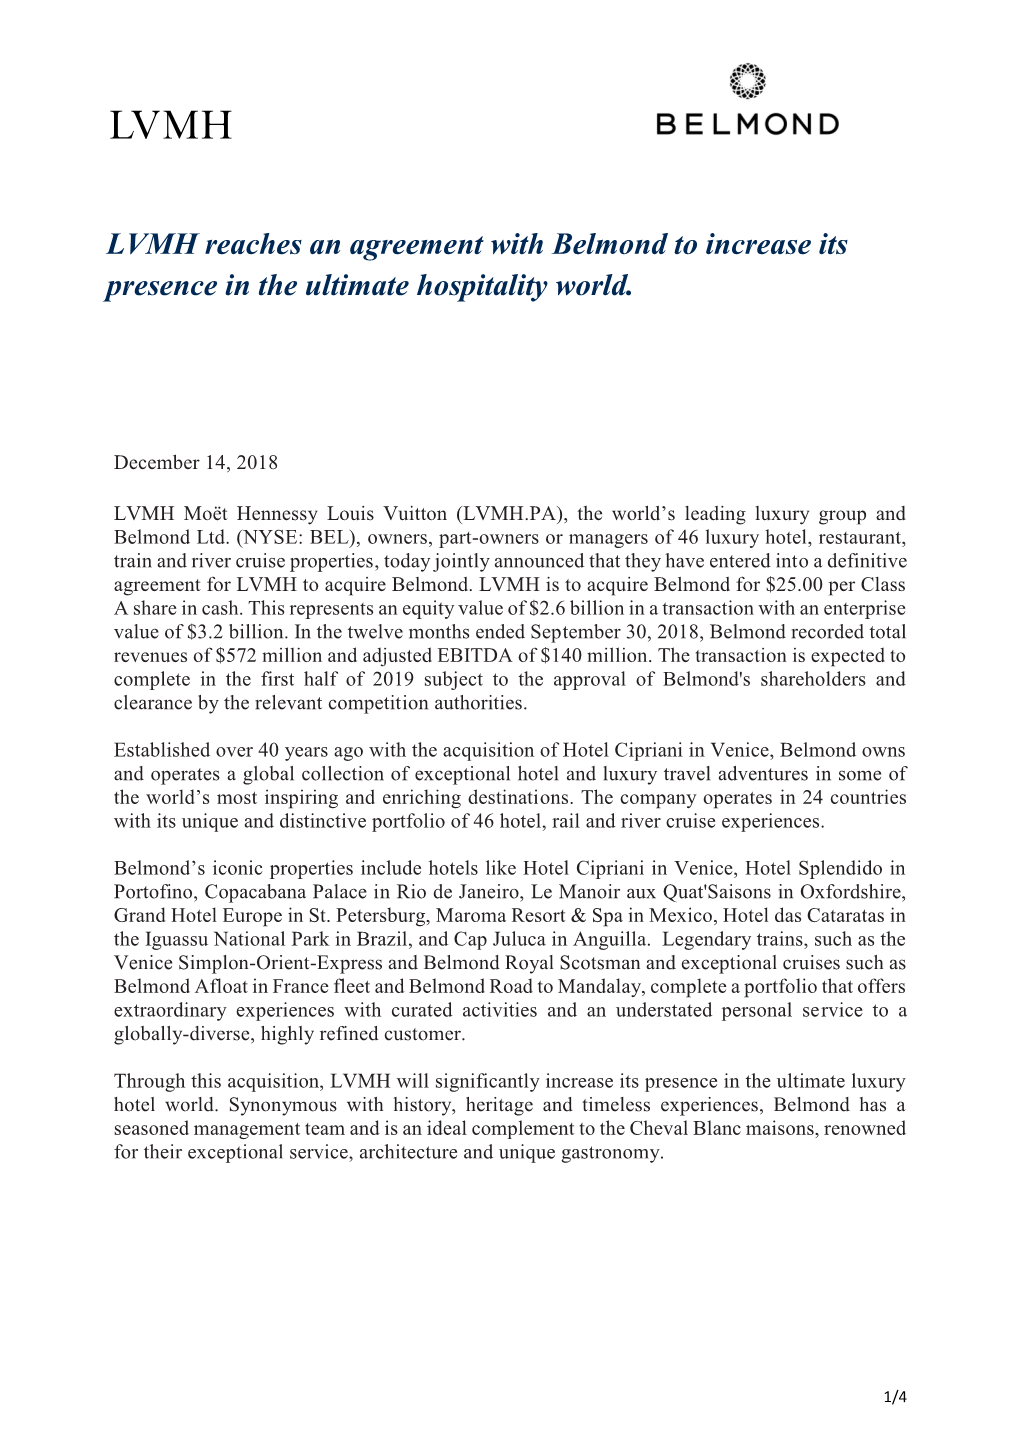 LVMH Reaches an Agreement with Belmond to Increase Its Presence in the Ultimate Hospitality World